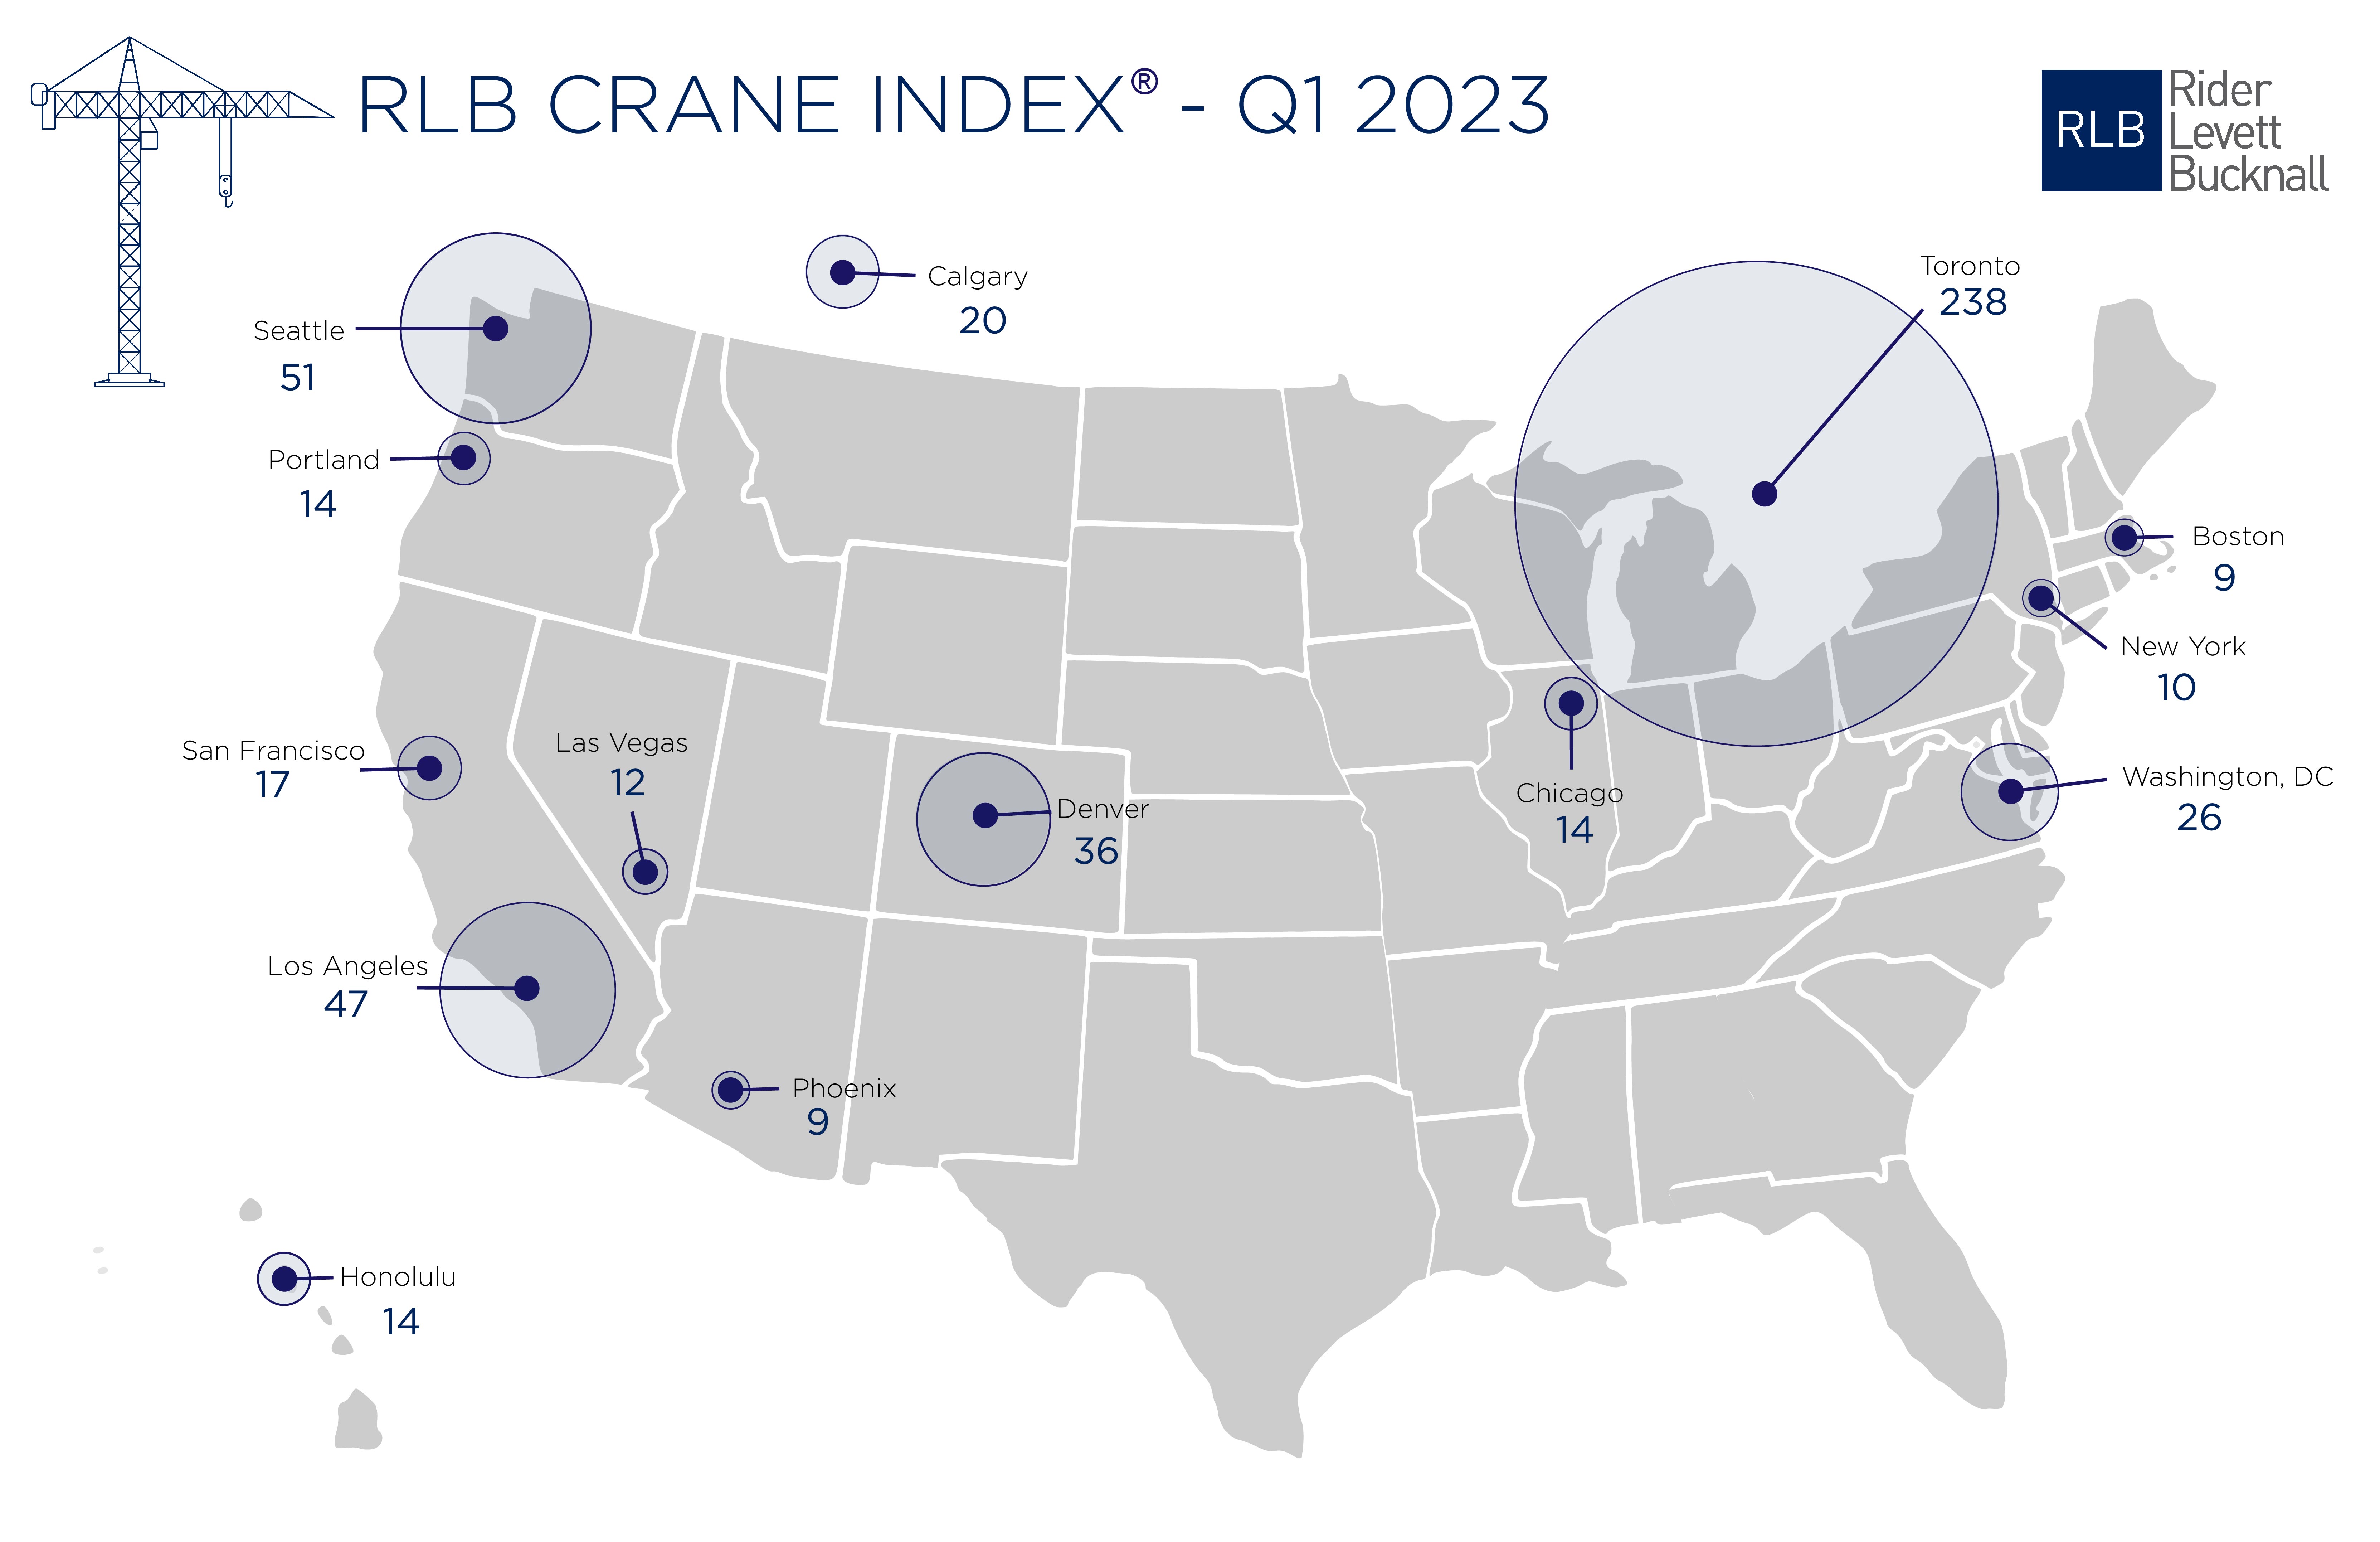 Construction crane count reaches all-time high in Q1 2023